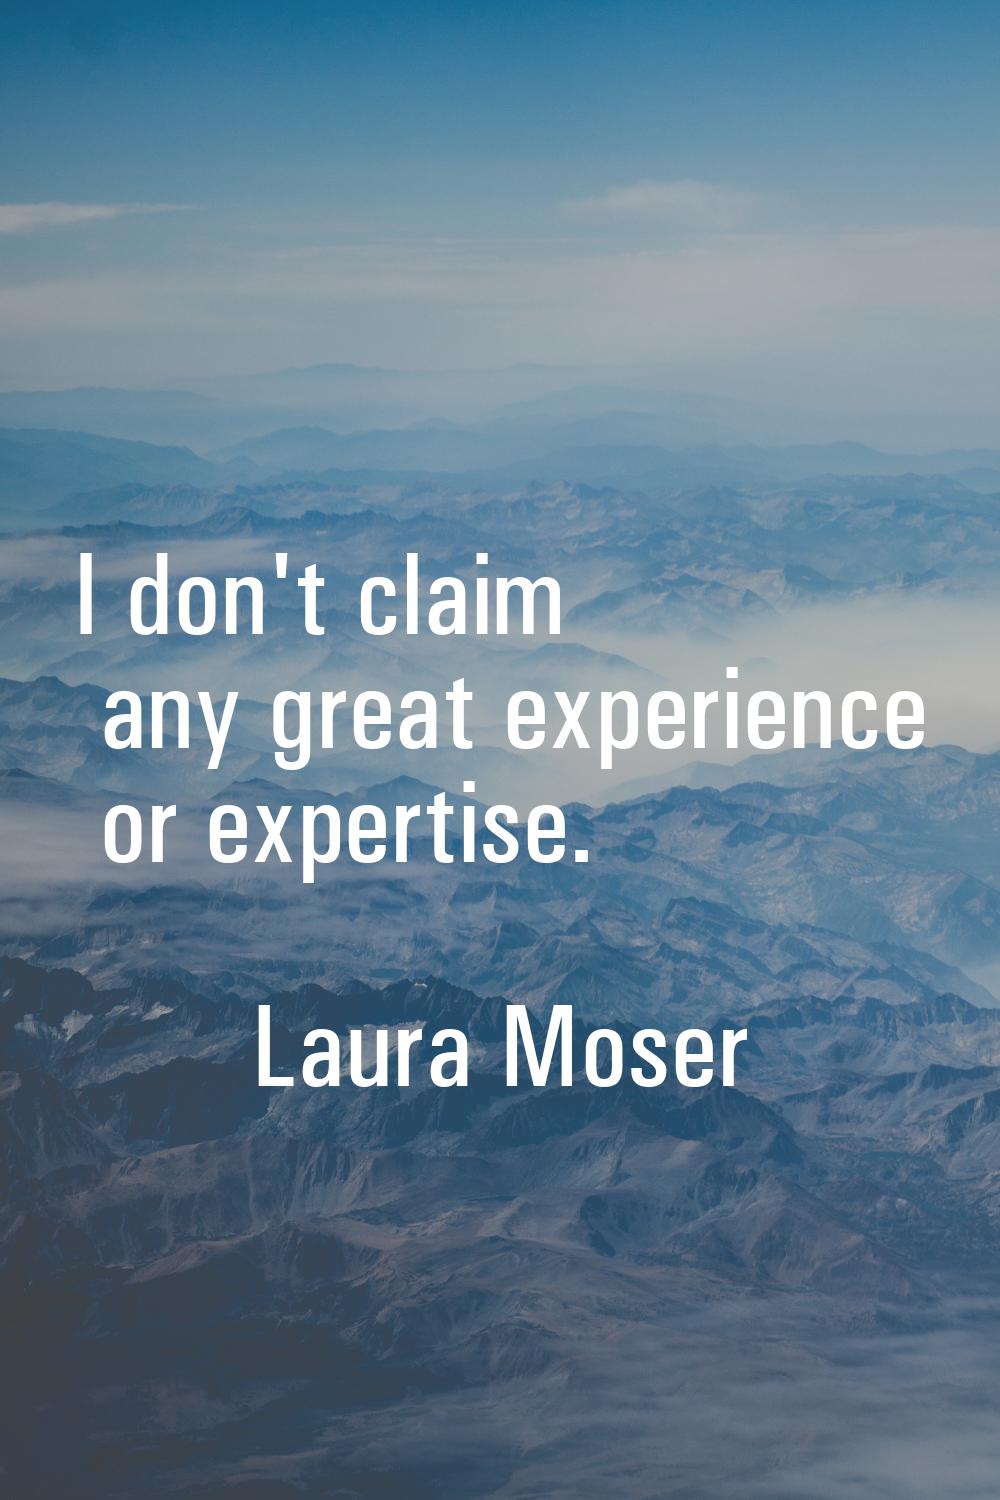 I don't claim any great experience or expertise.